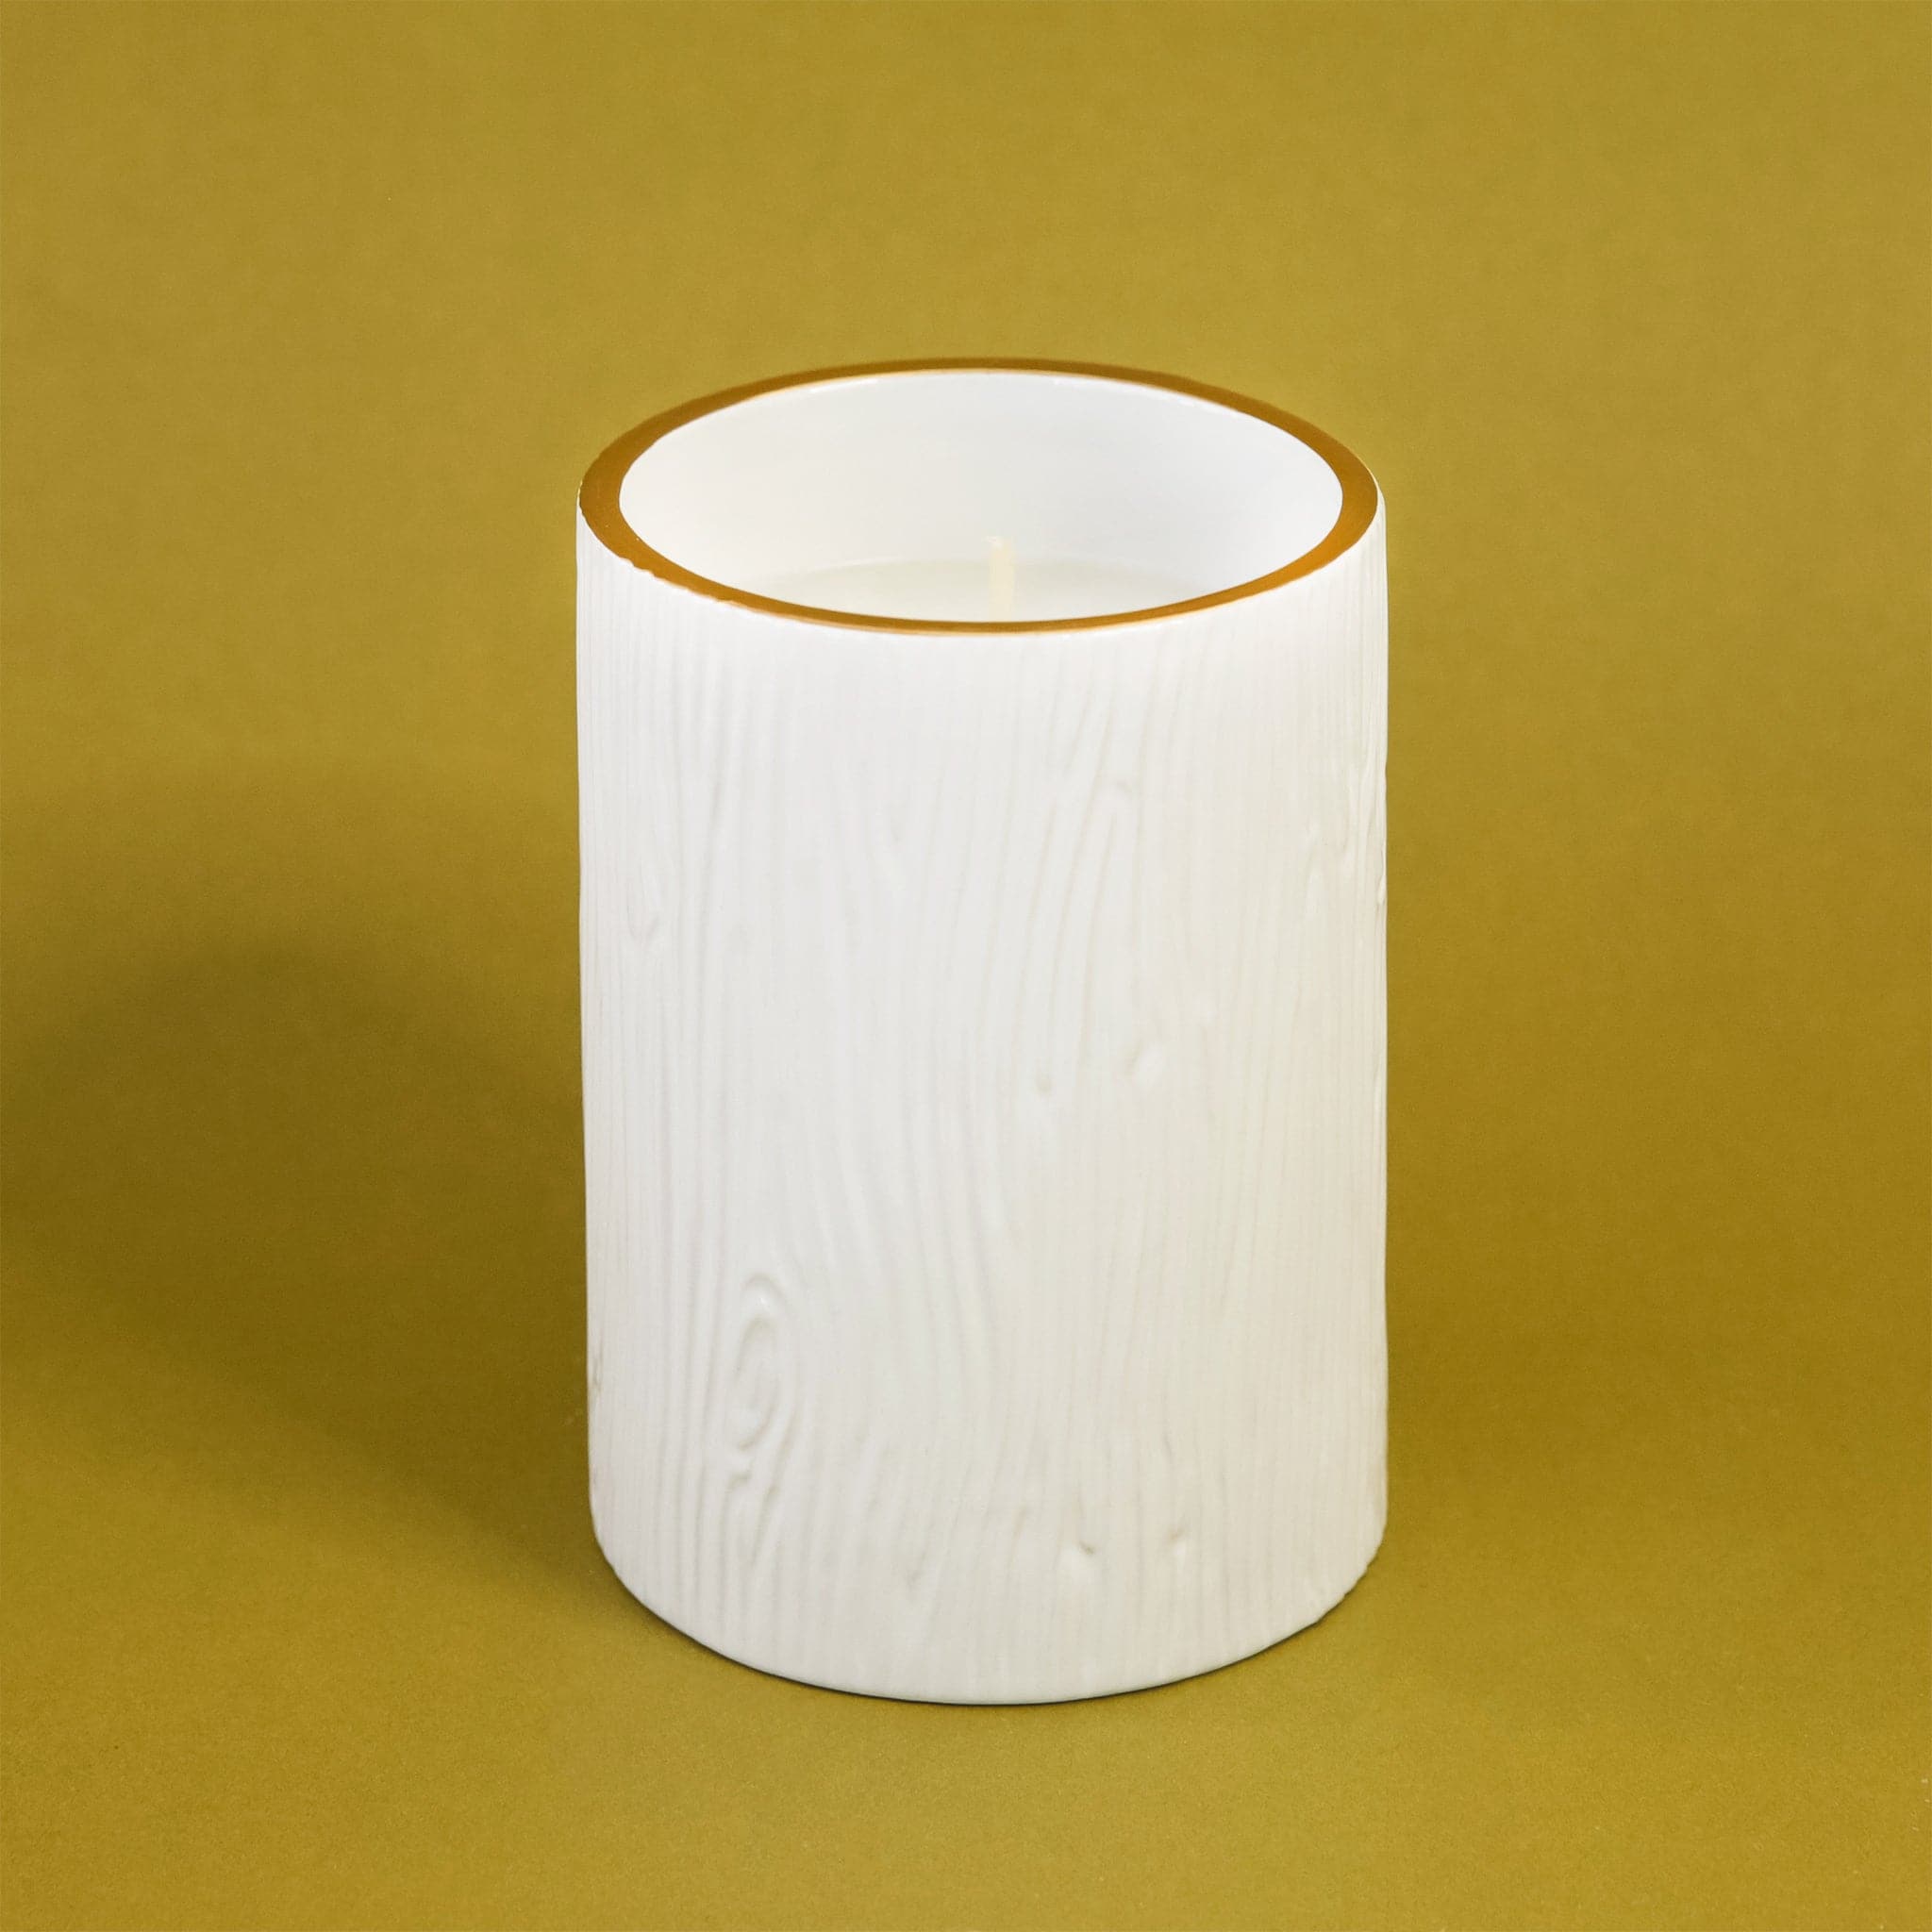 On a green background is a white candle with a wood texture glass.  